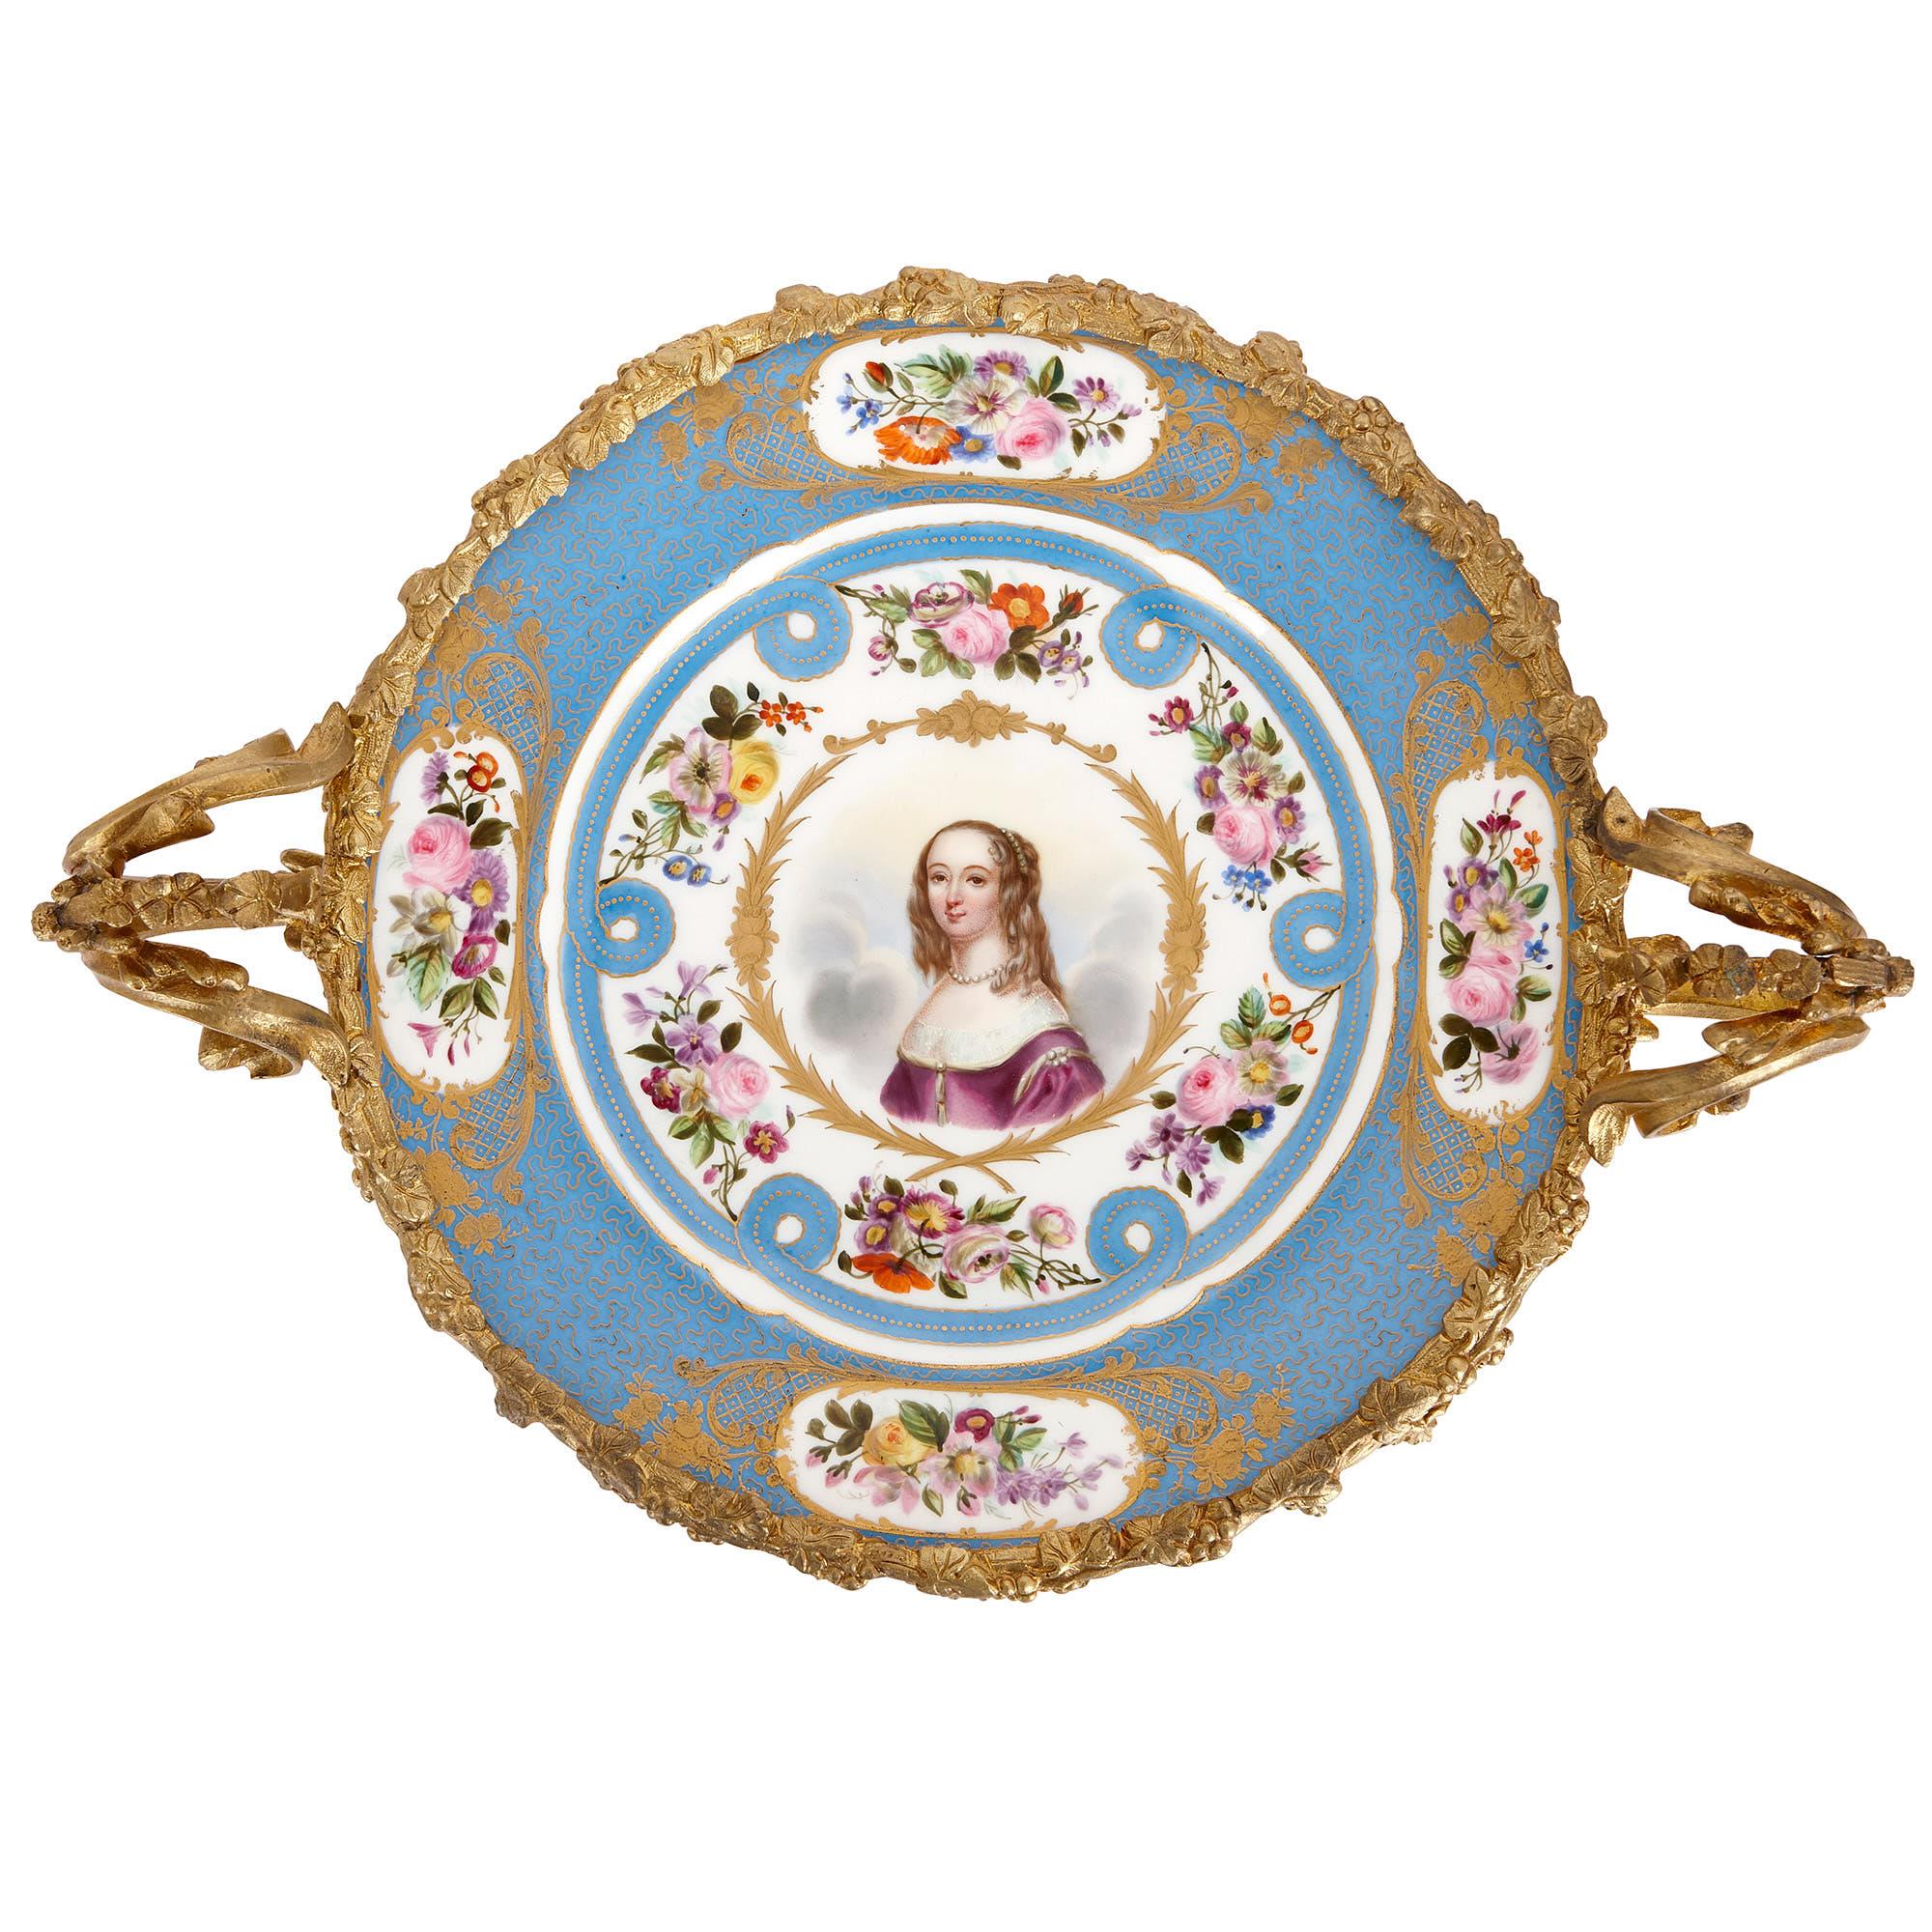 These beautiful mounted plates were crafted in circa 1830 in France. Designed in the Sevres style, the porcelain plates have been finely painted and set within elaborate gilt bronze mounts. 

At the centre of the plates’ painted decoration are